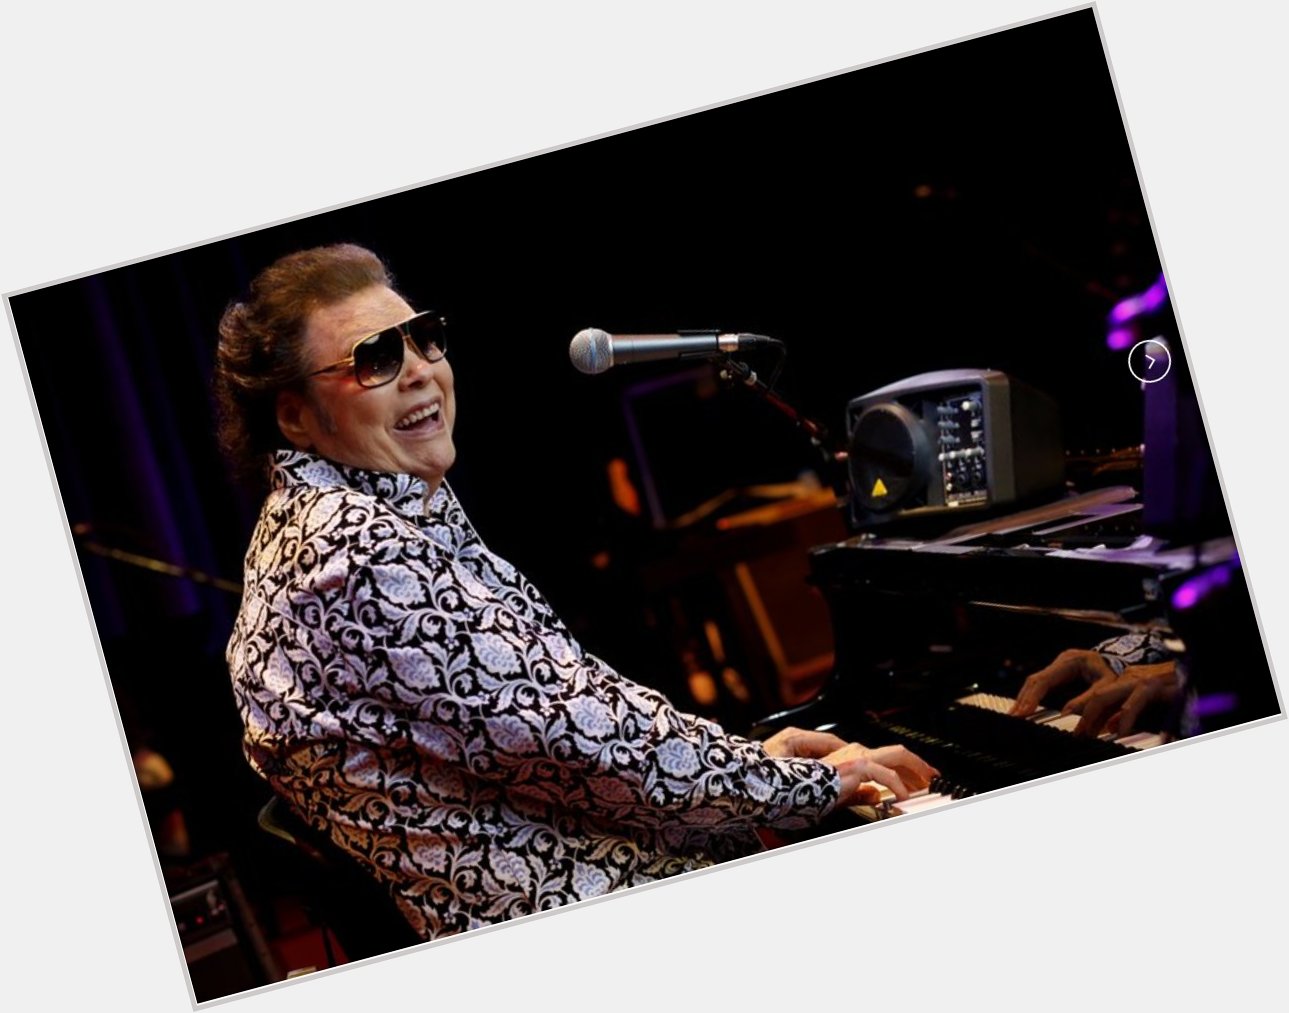 Happy Birthday Ronnie Milsap!
What are some of your favorite Ronnie Milsap songs / lyrics? 